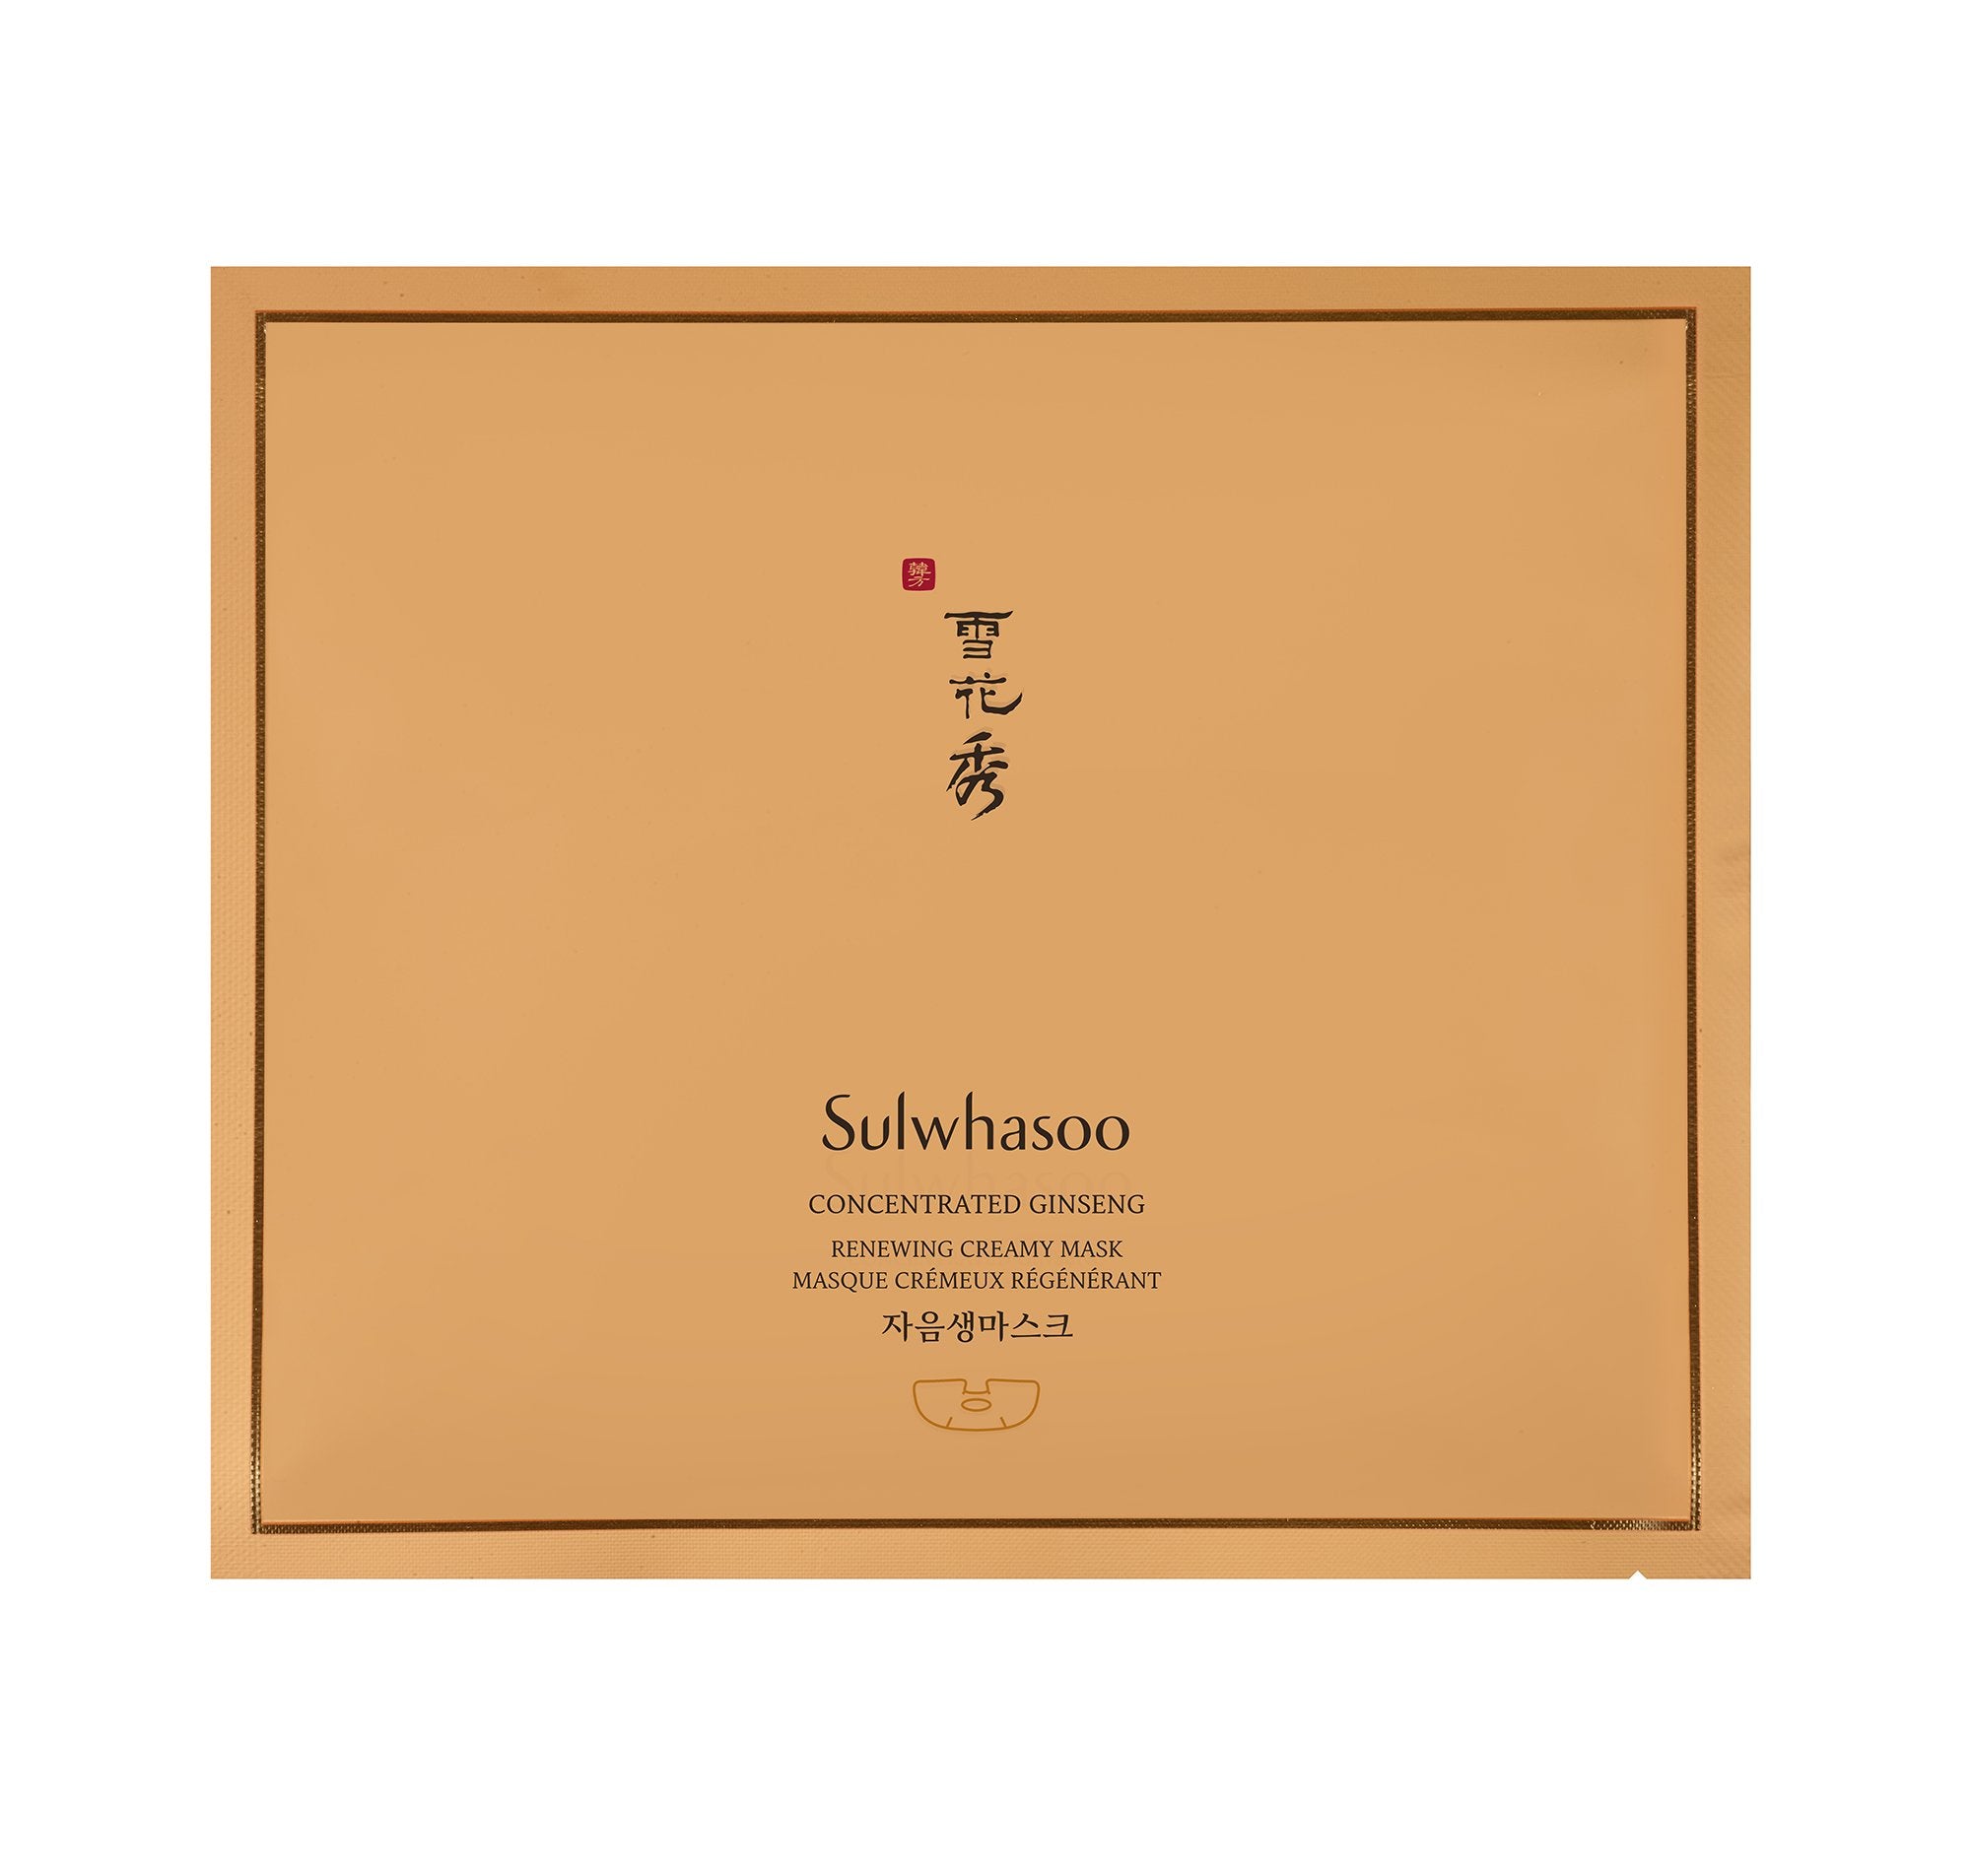 Sulwhasoo Concentrated Ginseng Renewing Creamy Mask 18g X 5ea